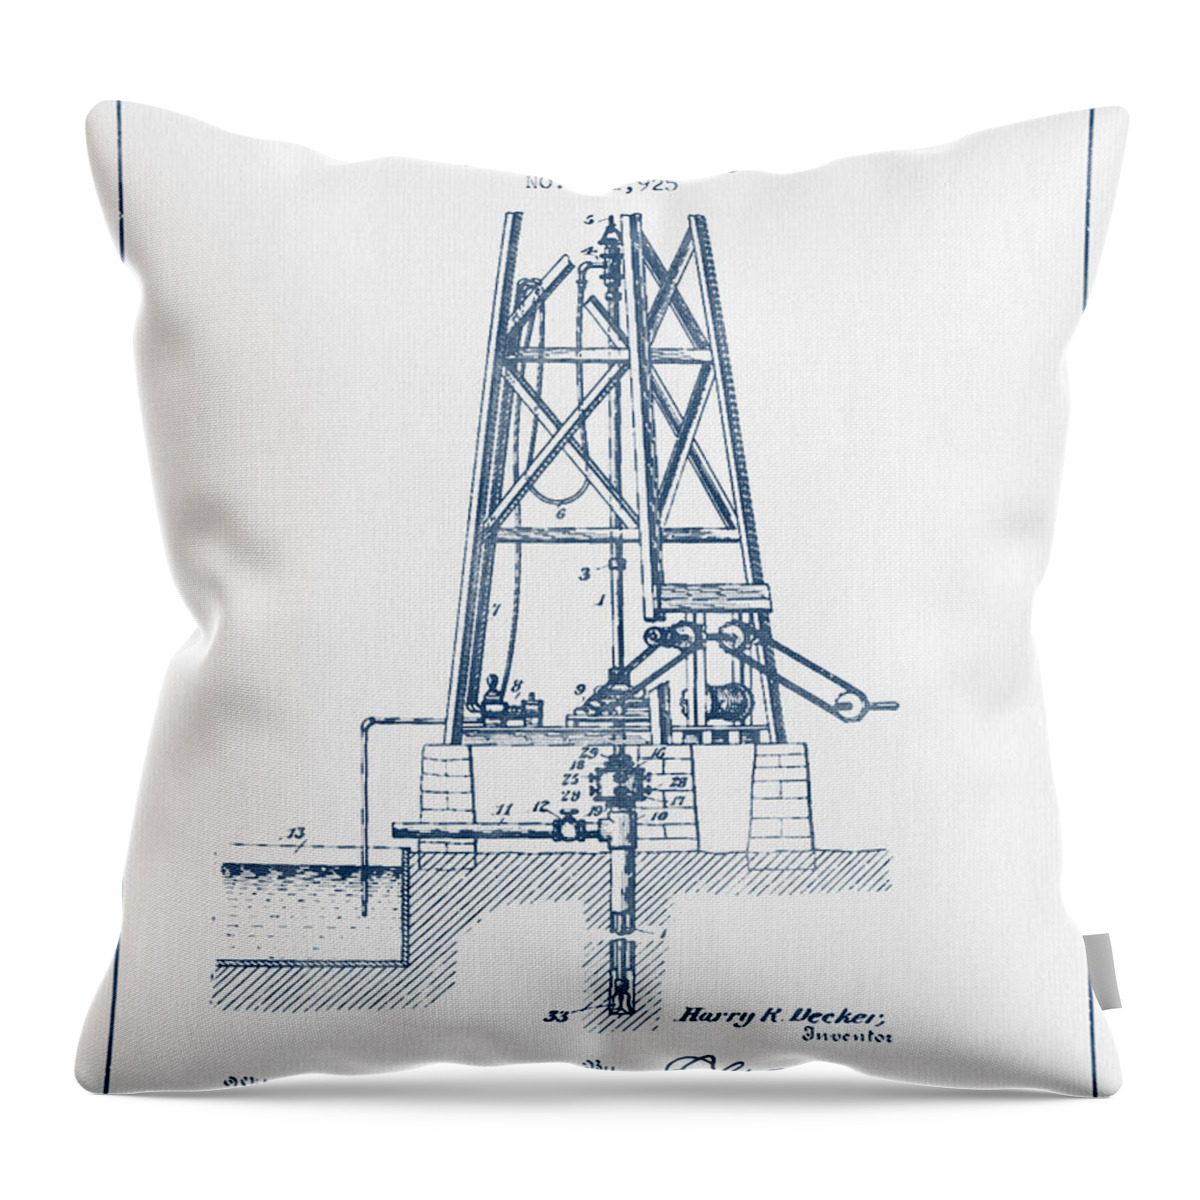 Well Drilling Throw Pillow featuring the digital art Oil Well Drill Patent From 1903 - Blue Ink by Aged Pixel